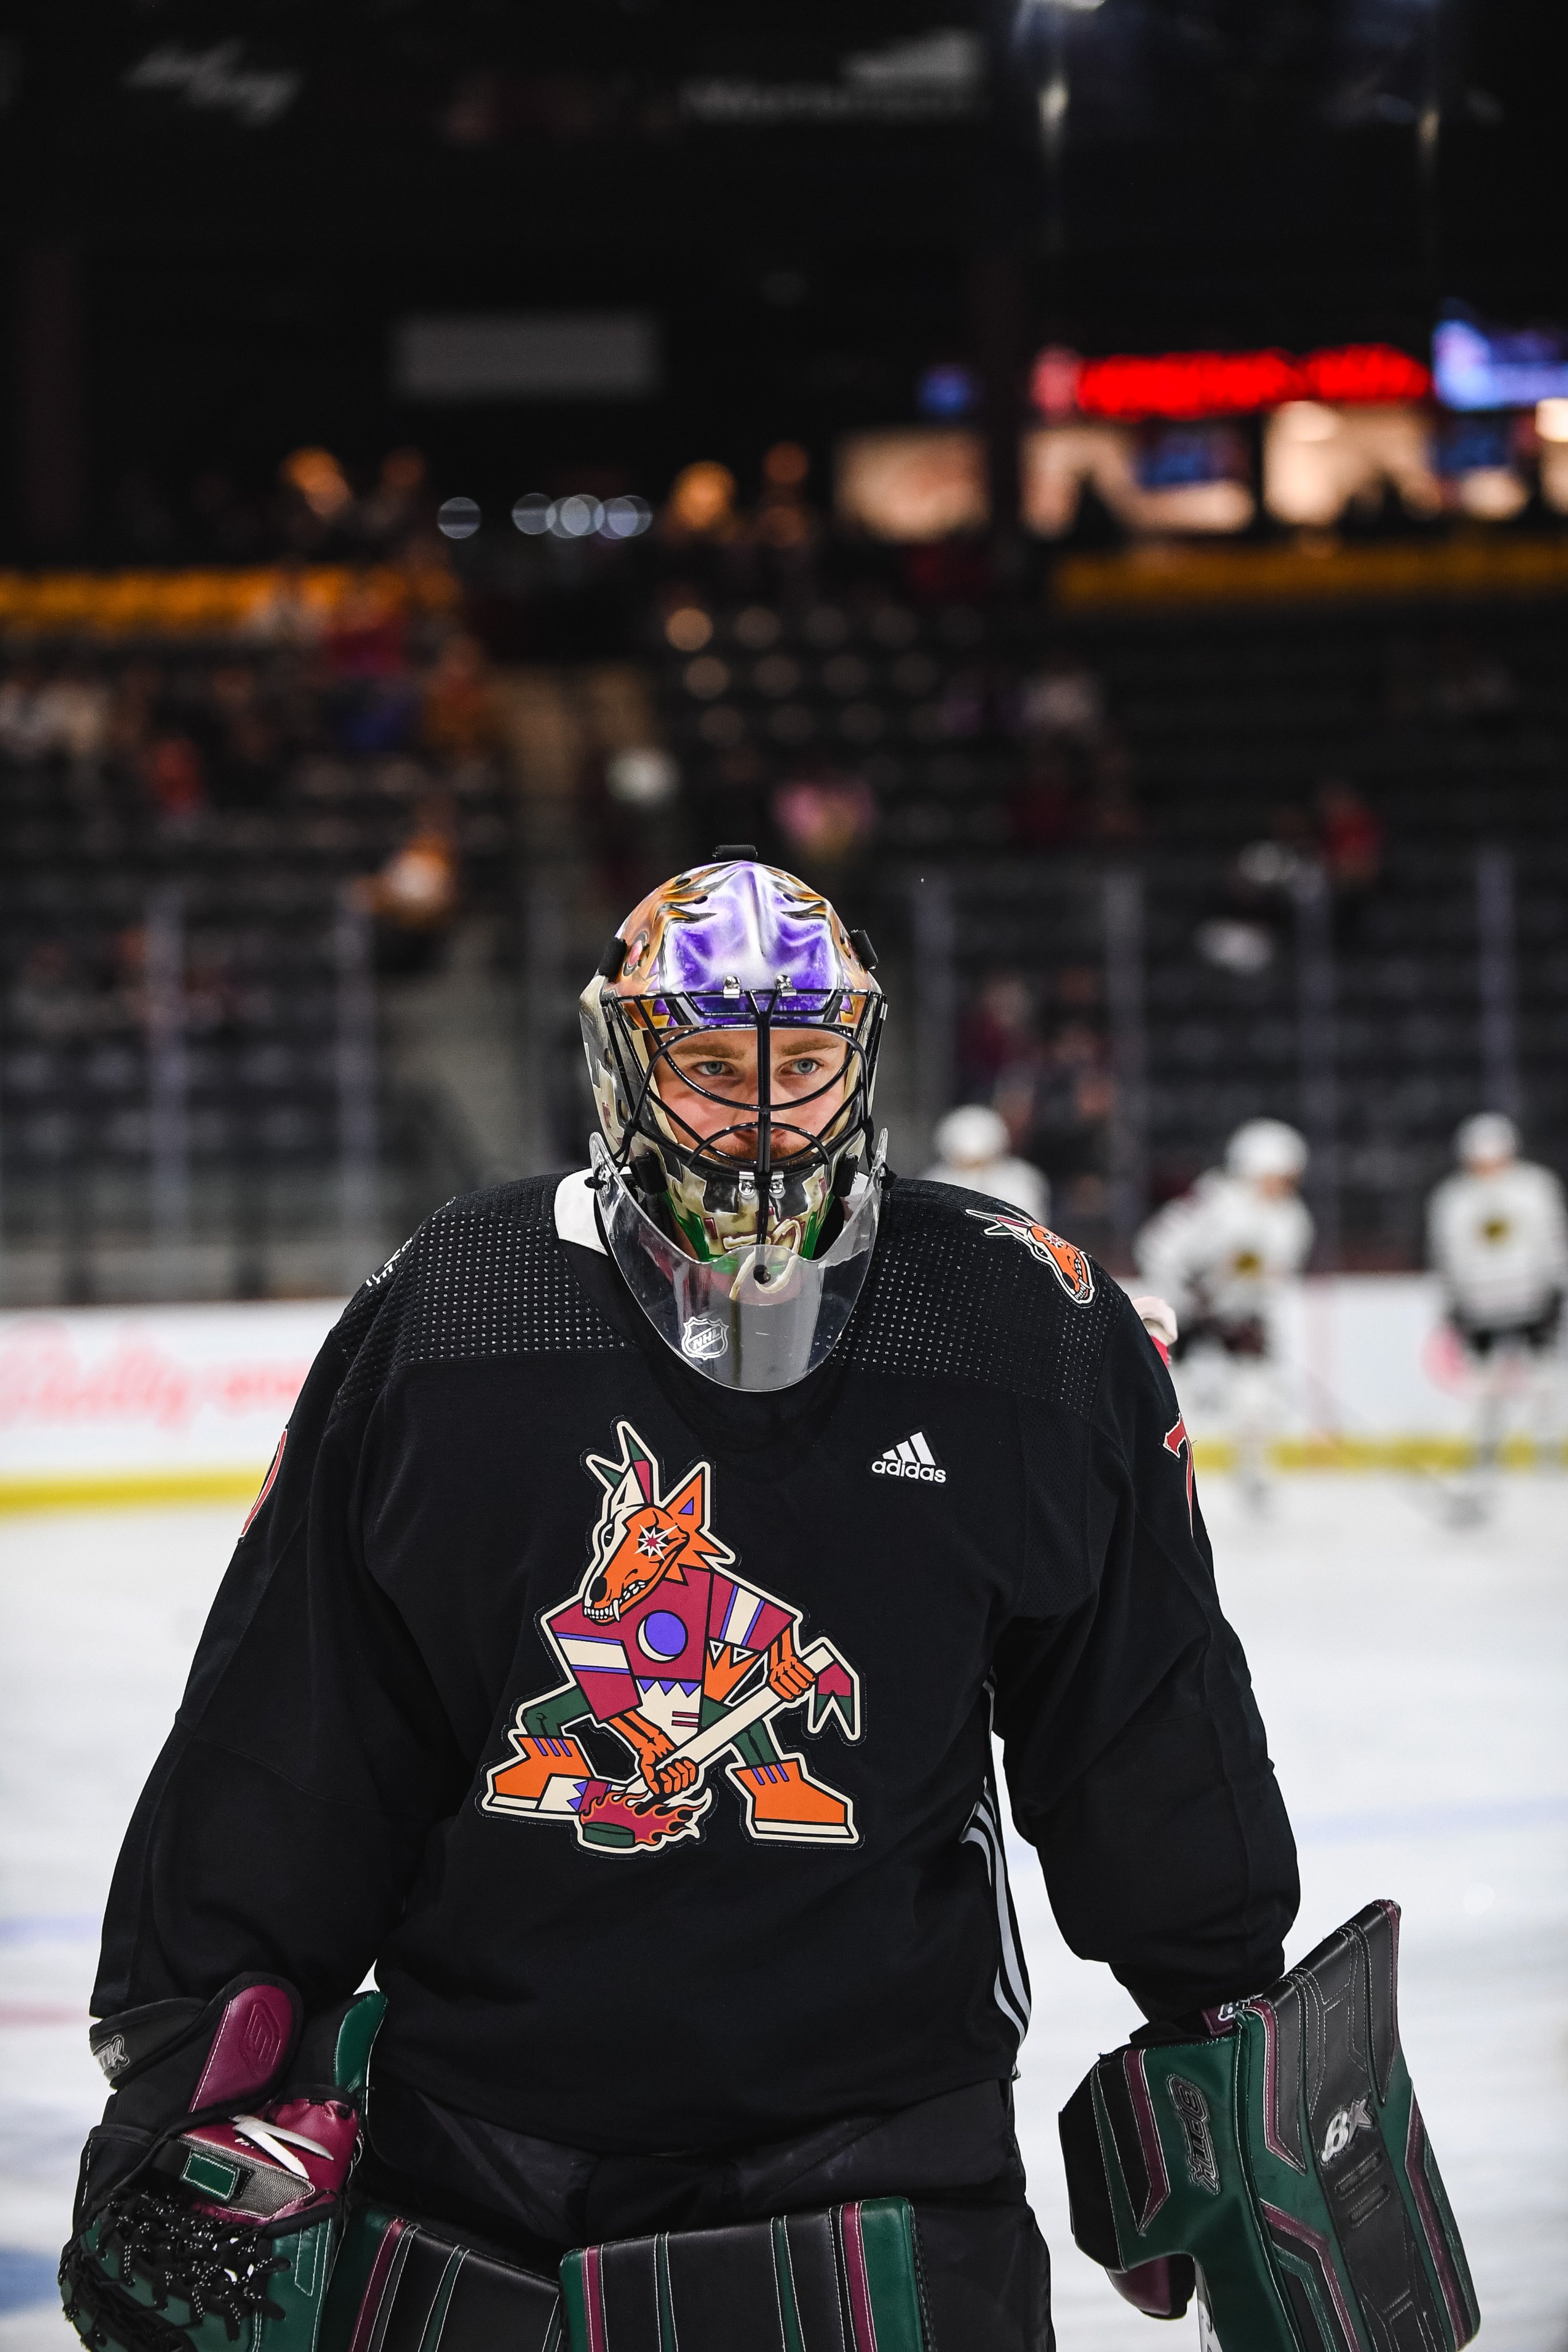 Our Los Yotes Night jersey auction is now open! 🌸 Bid now until